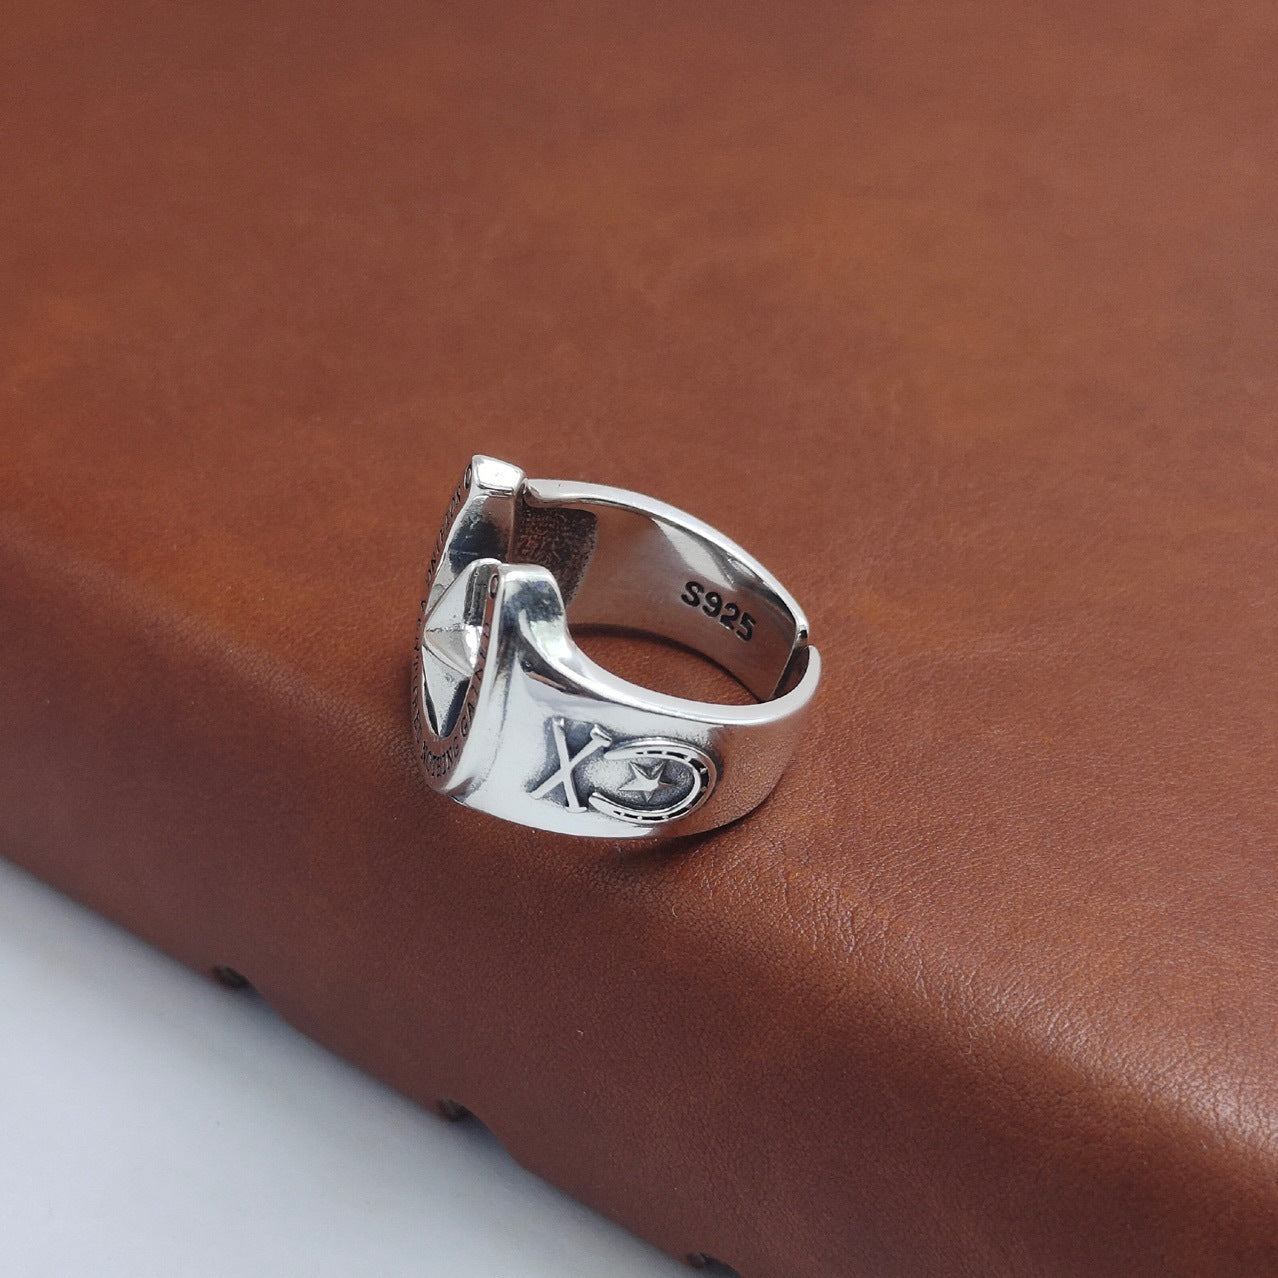 Nothing Gained, Nothing Ventured Adjustable Ring